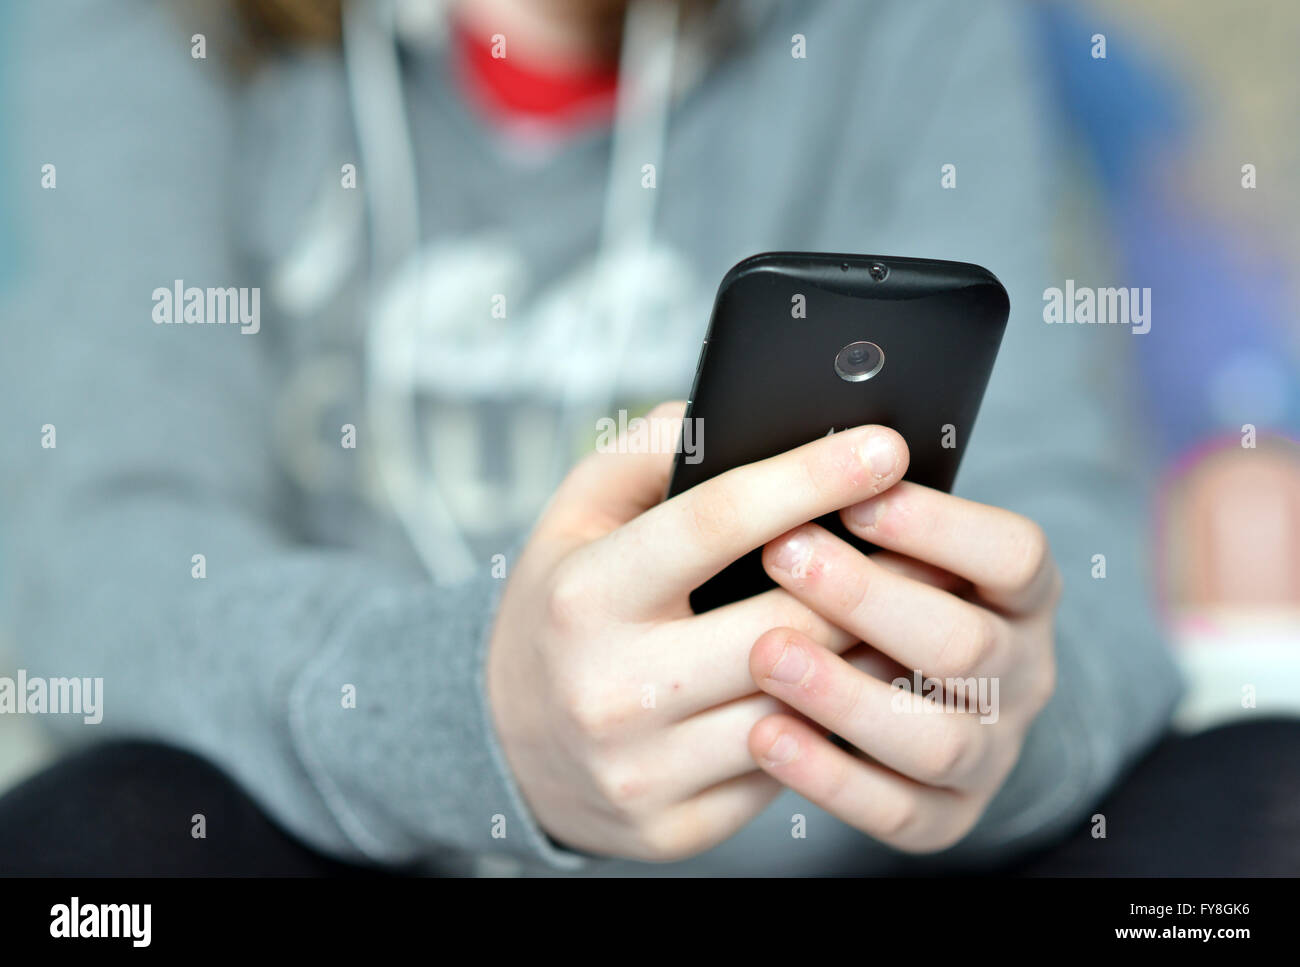 Teen holding mobile (cell) phone in hands Stock Photo